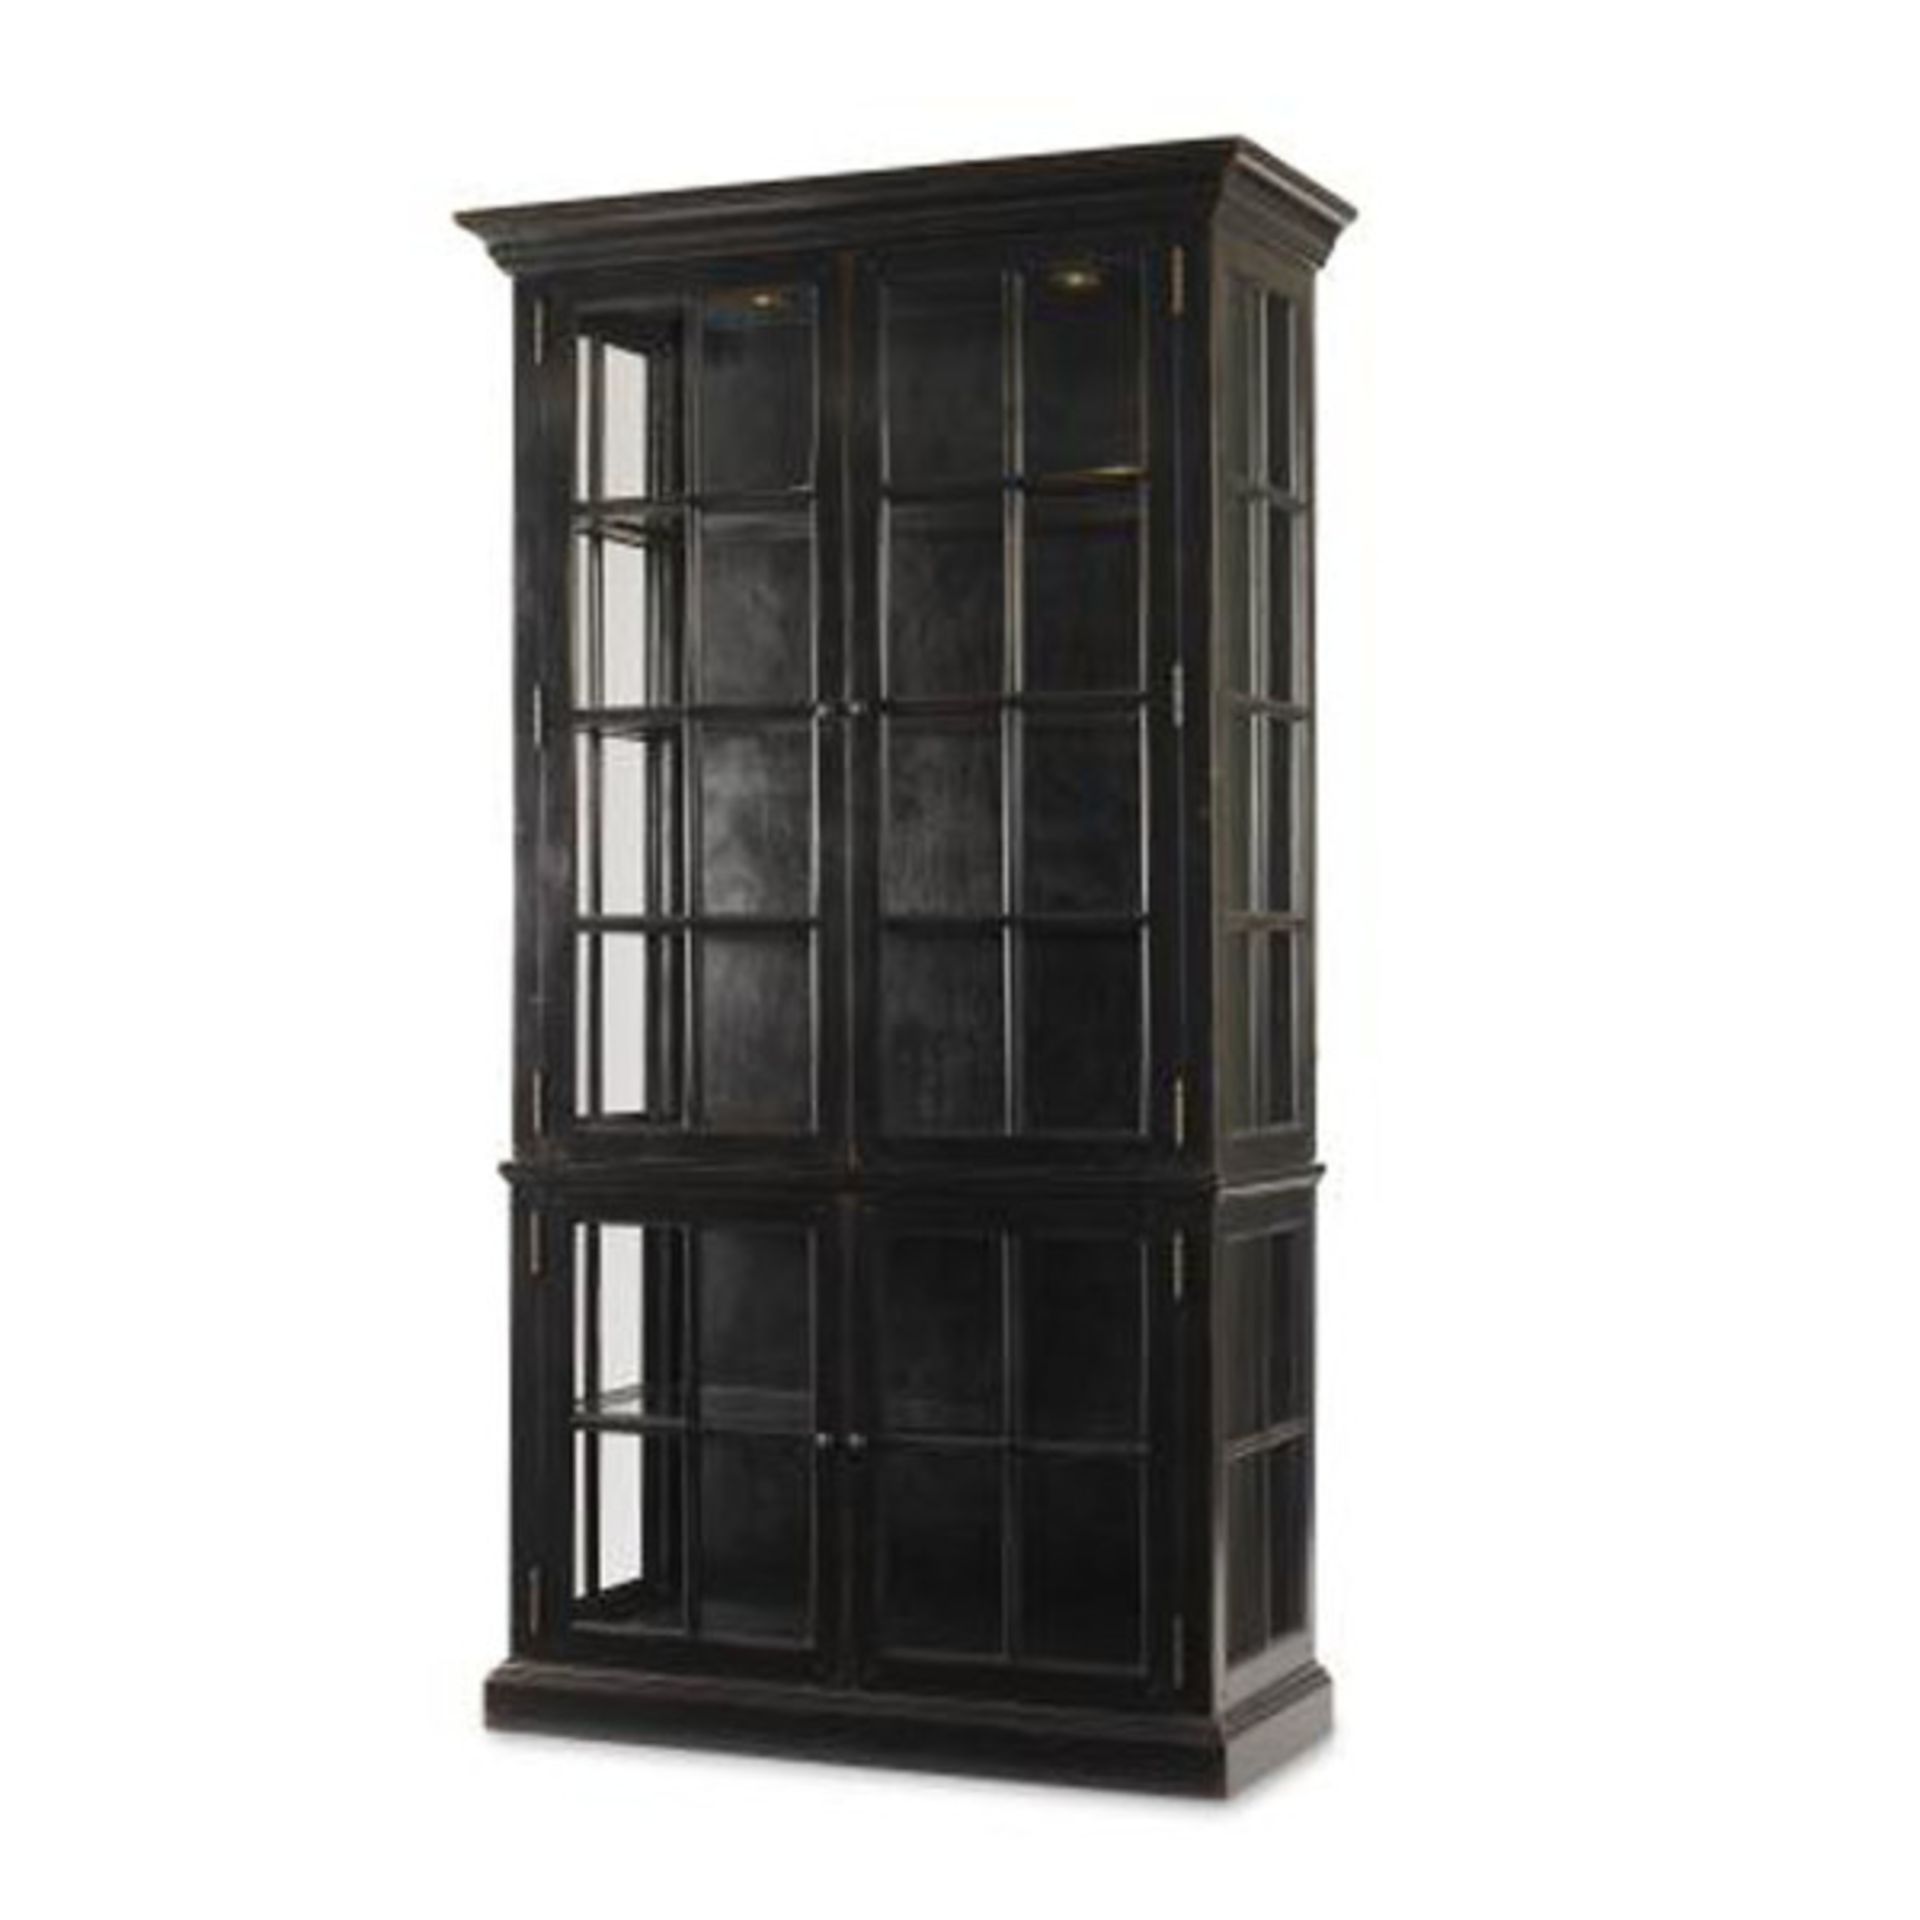 Waltham Cabinet A classic beautifully carved display cabinet 126.5 x 53.5 x 229.1 cm MSRP £3690